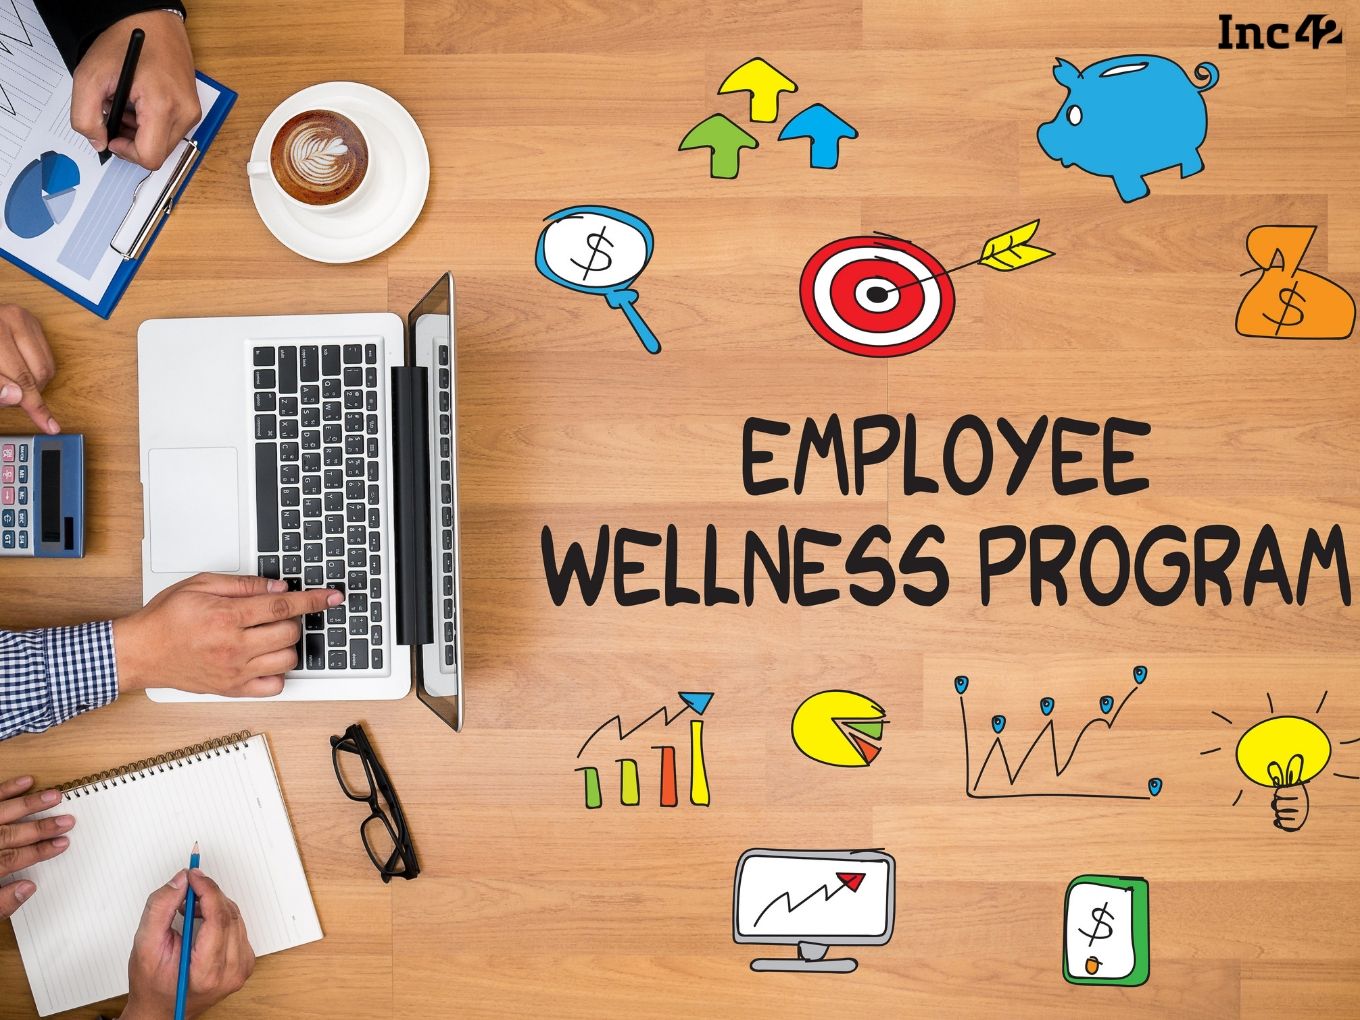 Workplace Wellness: Why Sleep Is An Essential Part Of It